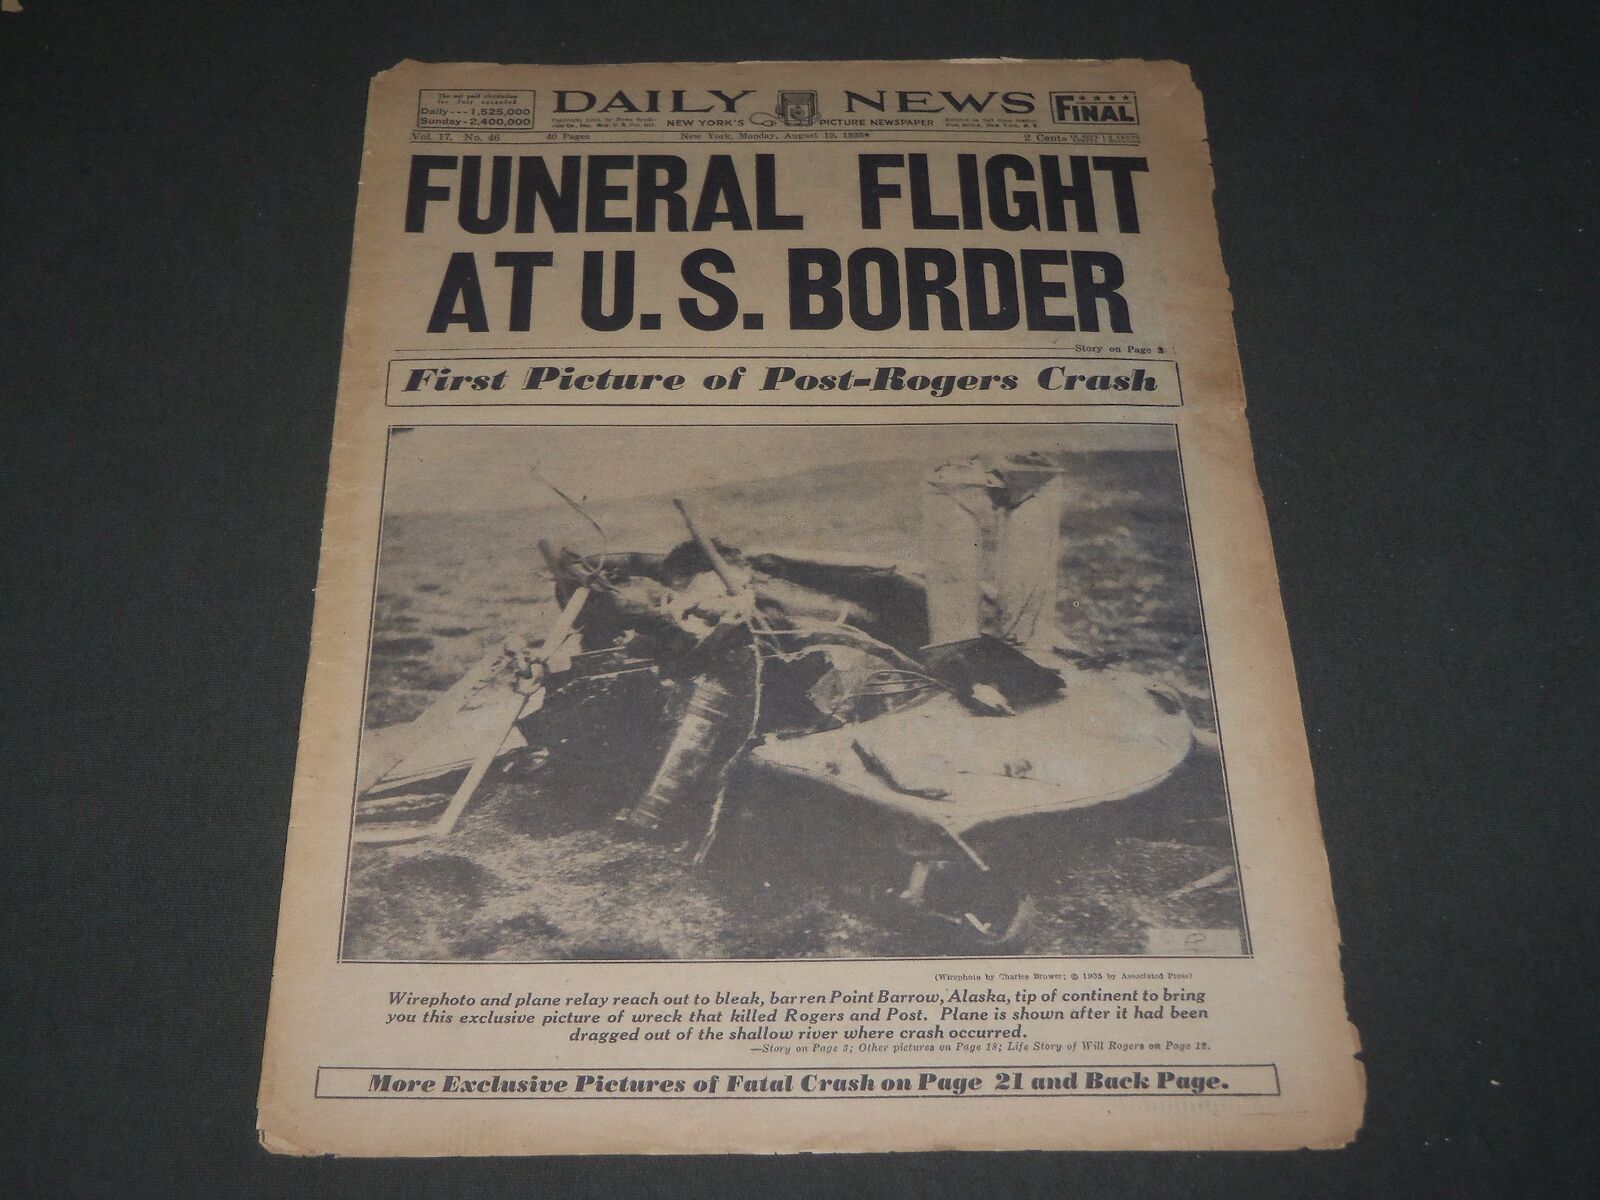 1935 AUGUST 19 NEW YORK DAILY NEWS - FUNERAL FLIGHT AT U. S. BORDER - NP 2907